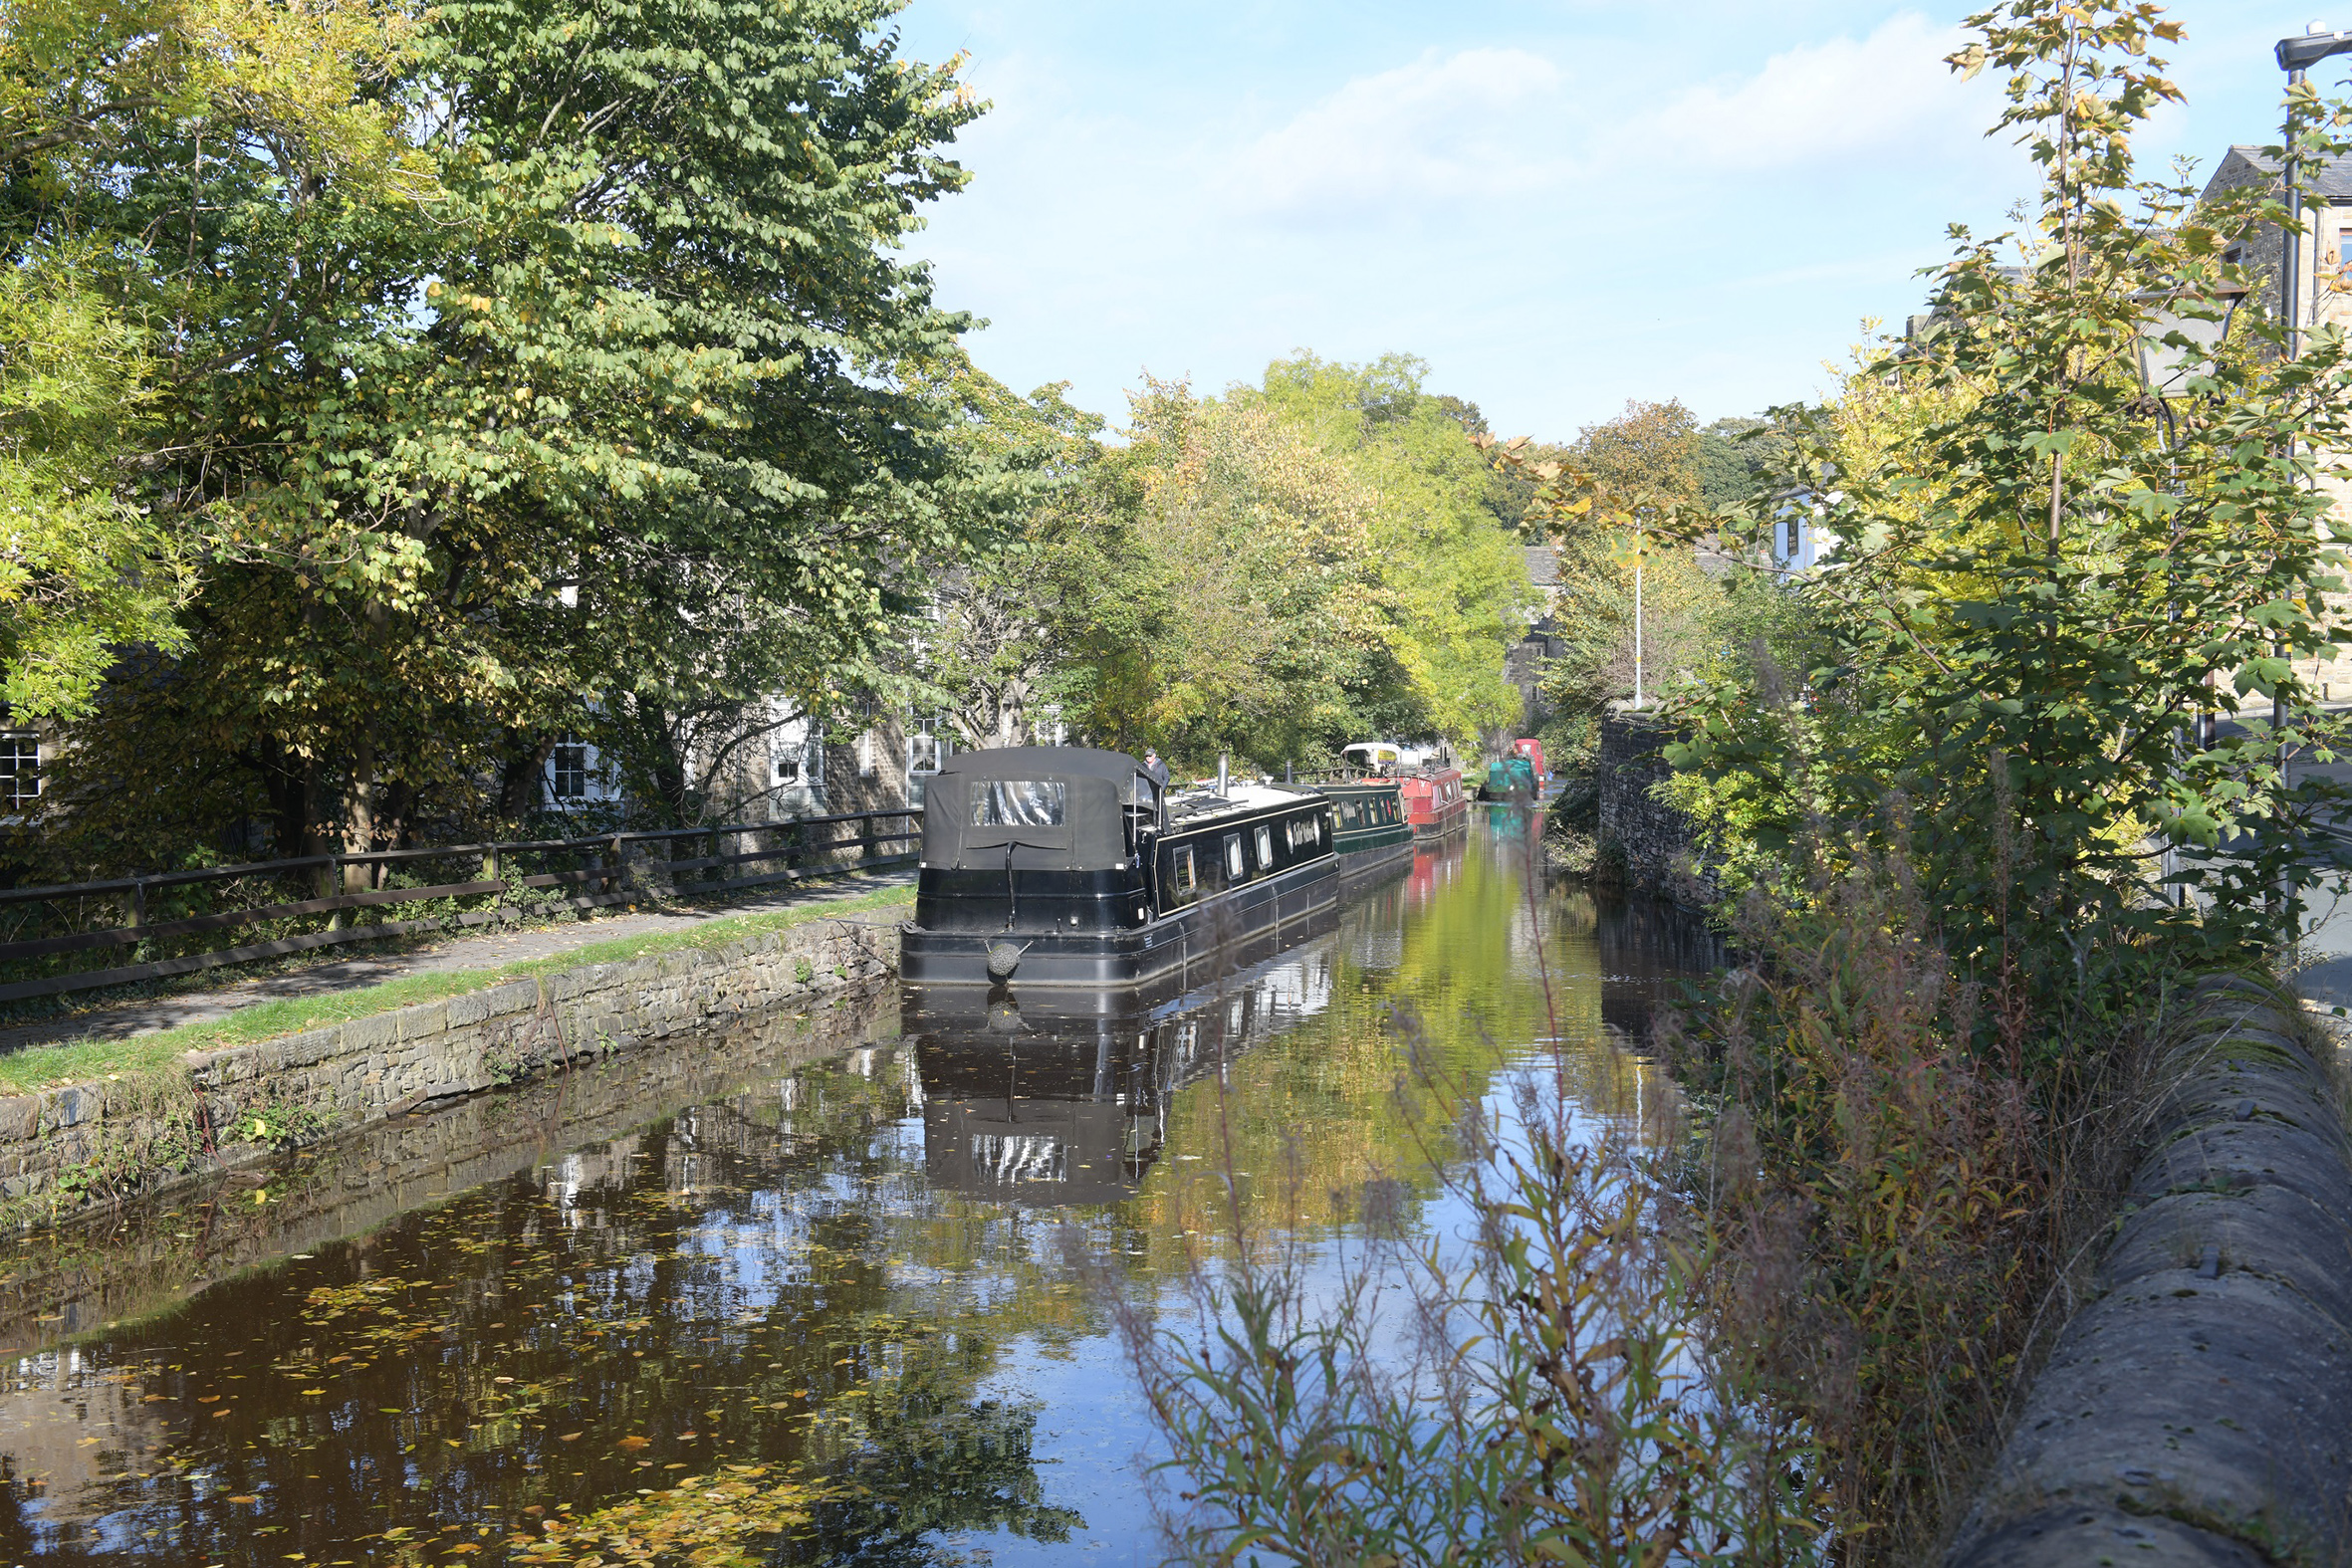 A scenic shot of the Leeds and Liverpool Canal that runs through the heart of Skipton. The North Yorkshire town will host a month-long celebration of its culture and heritage, starting on the annual Yorkshire Day on 1 August.